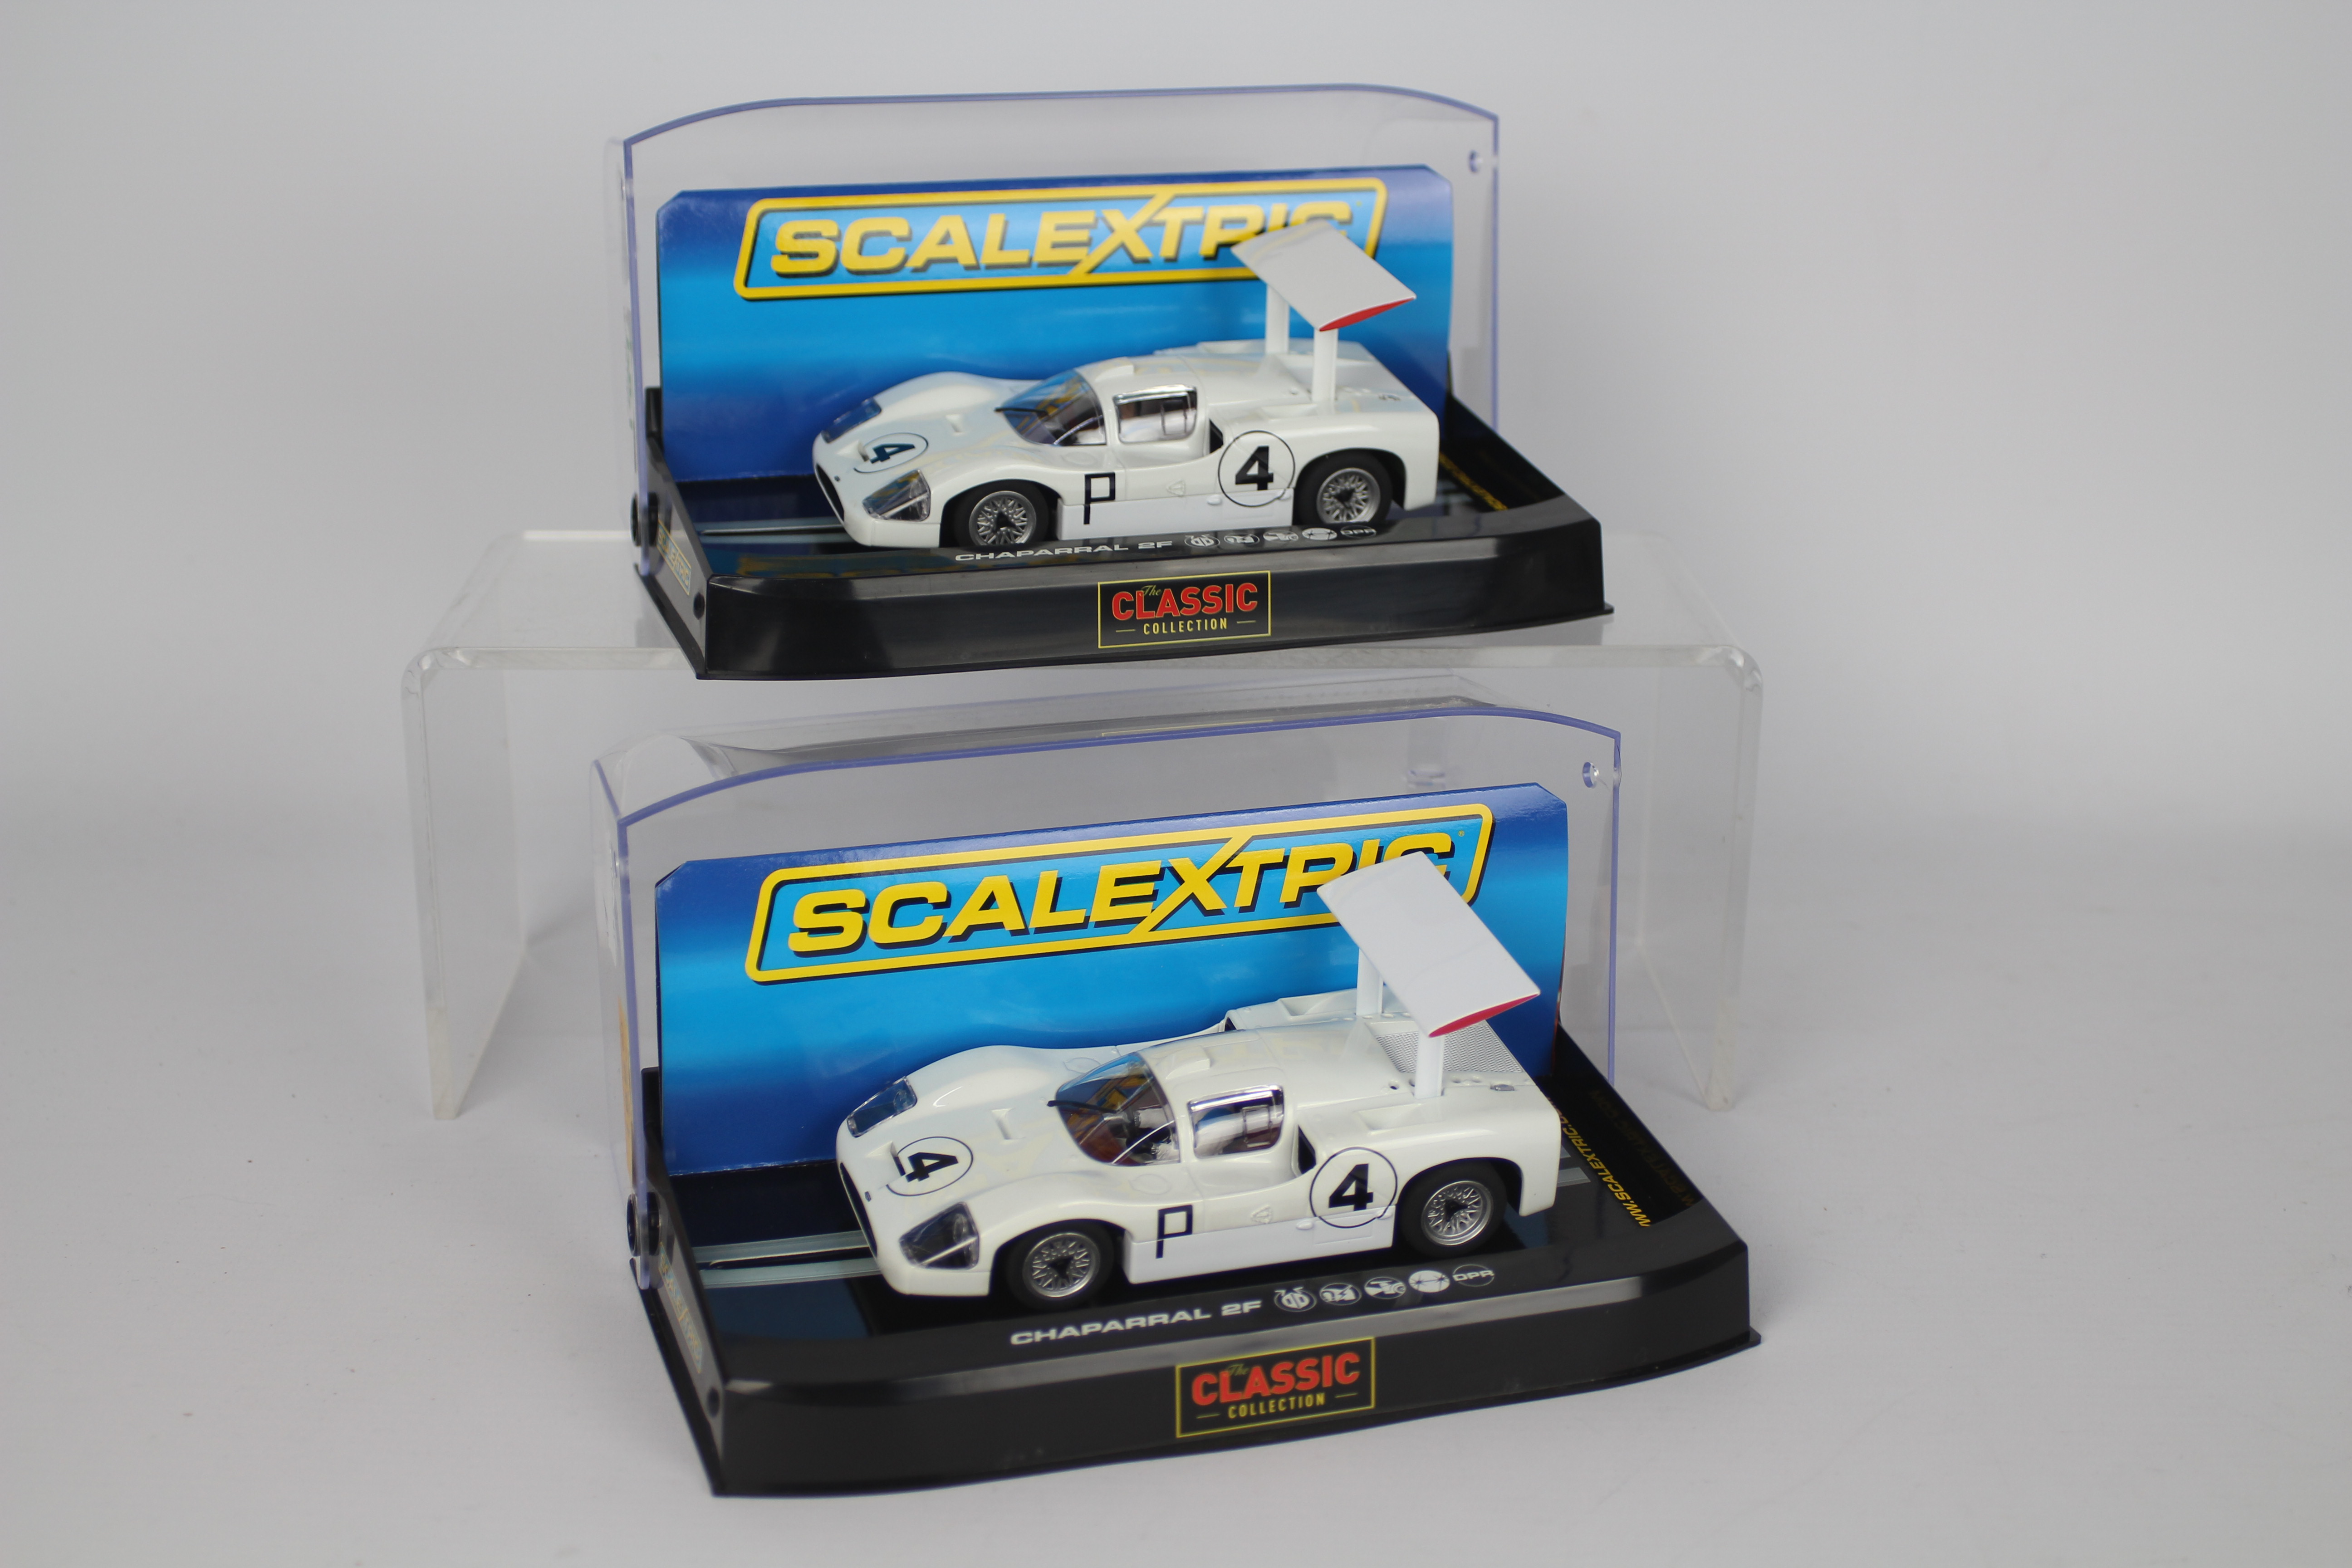 Scalextric - Two boxed Scalextric C2916 Chaparral 2F RN4 1:32 scale slot cars from the Scalextric